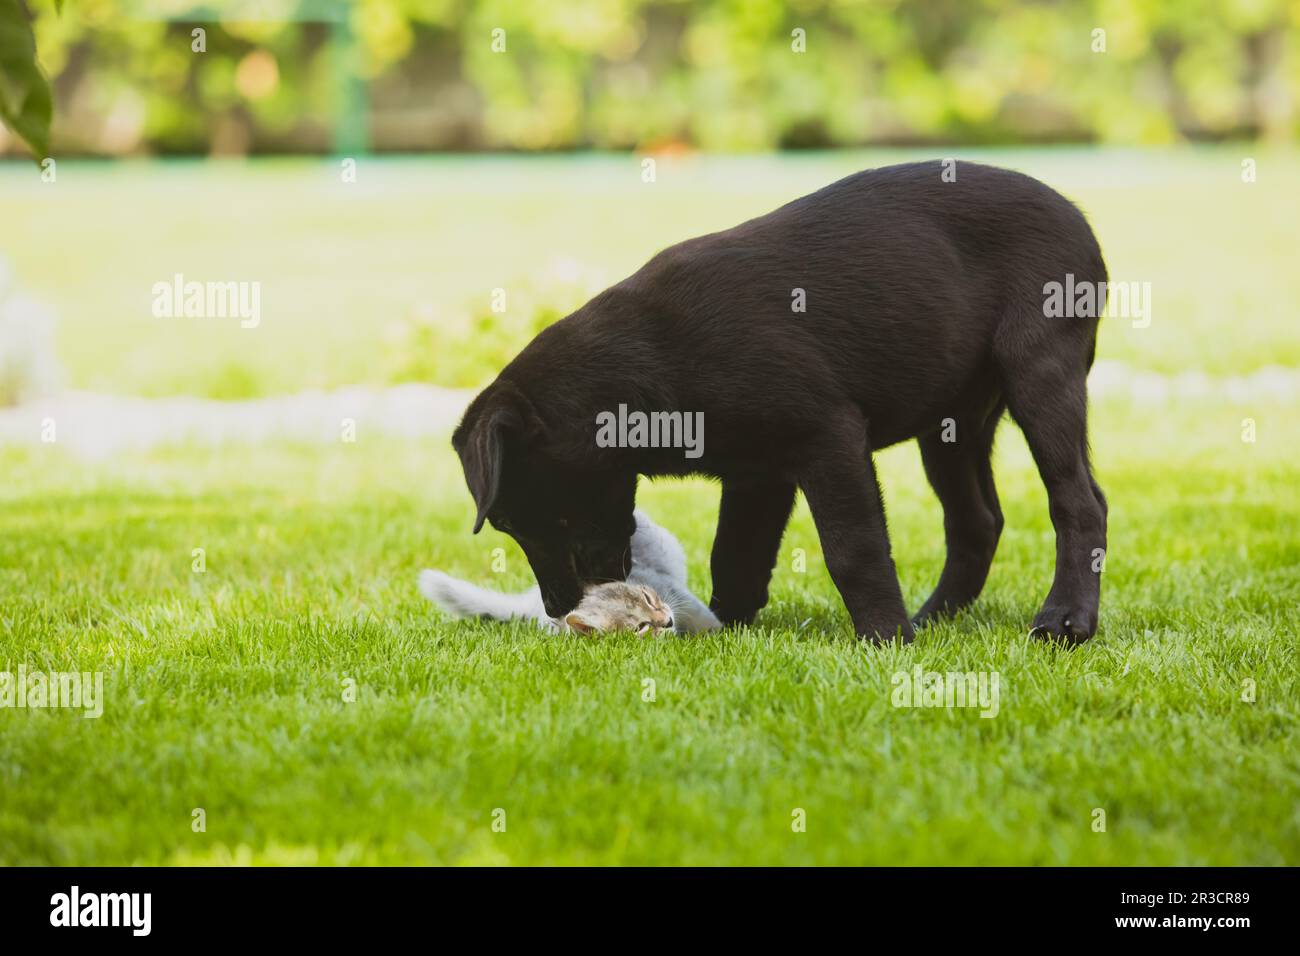 Funny animals playing outdoors in the garden Stock Photo